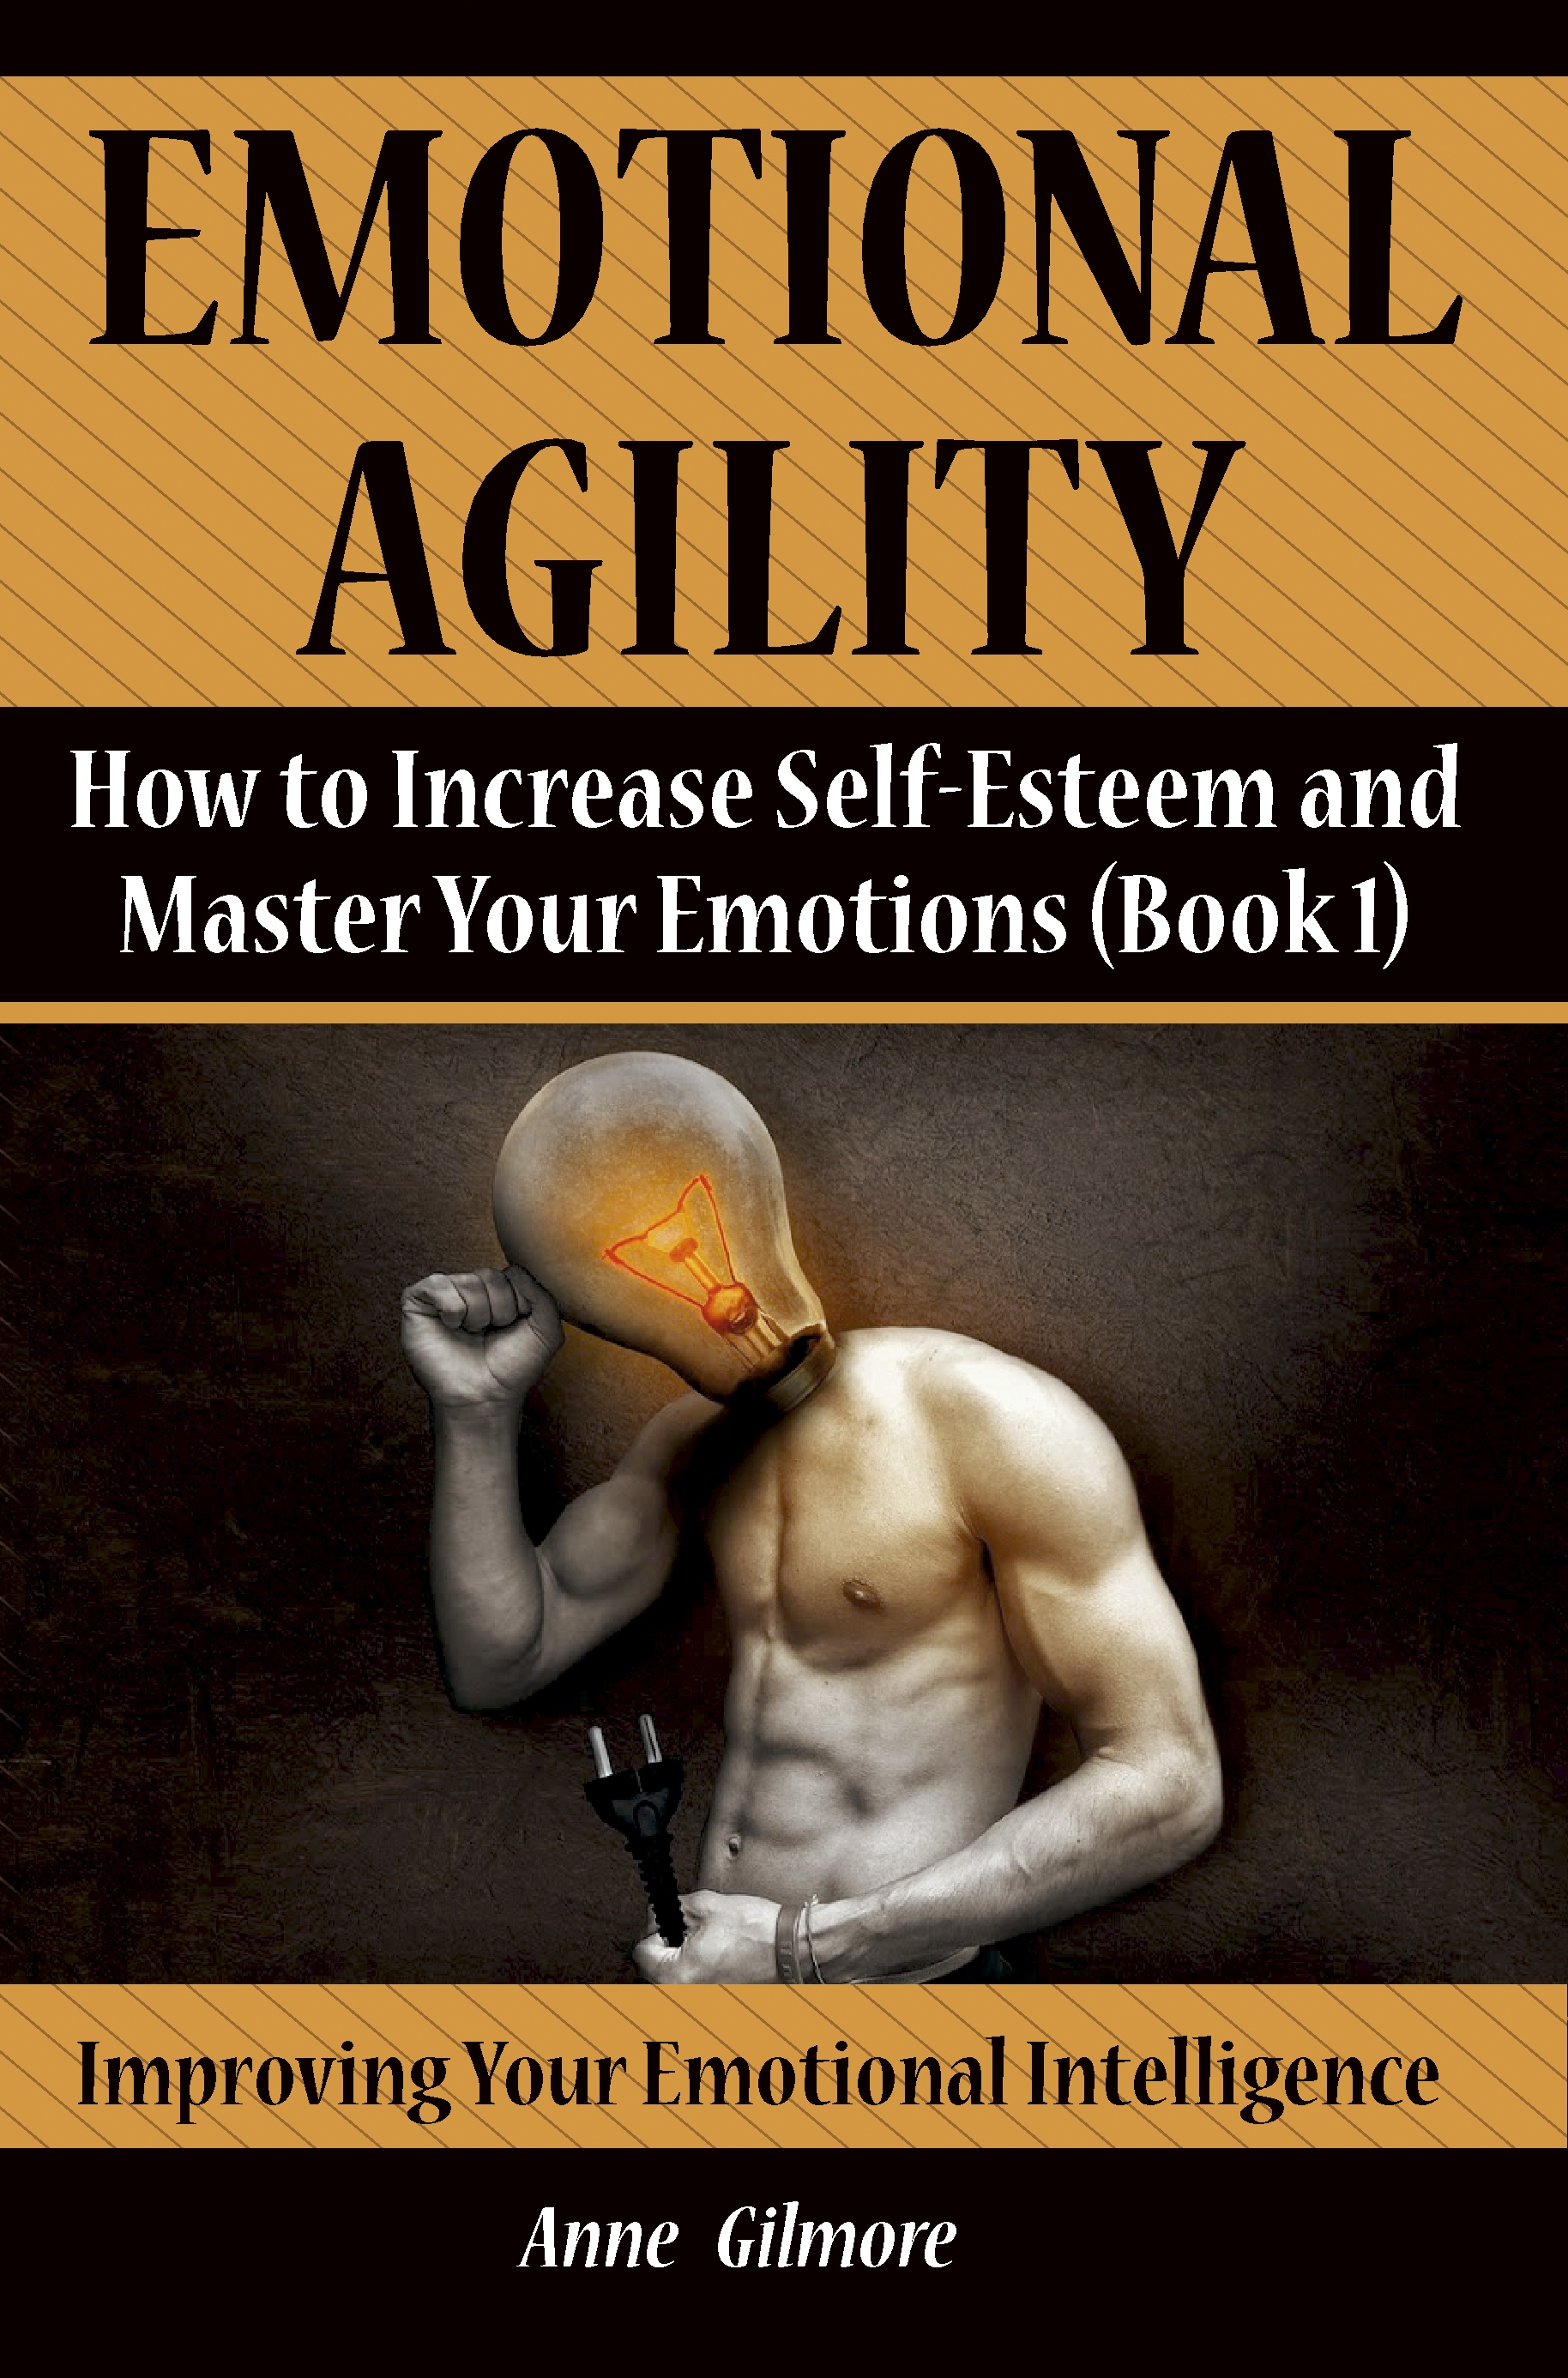 FREE: Emotional Agility: How to Increase Self-Esteem and Master Your Emotions (Book 1) by Anne Gilmore by Anne Gilmore